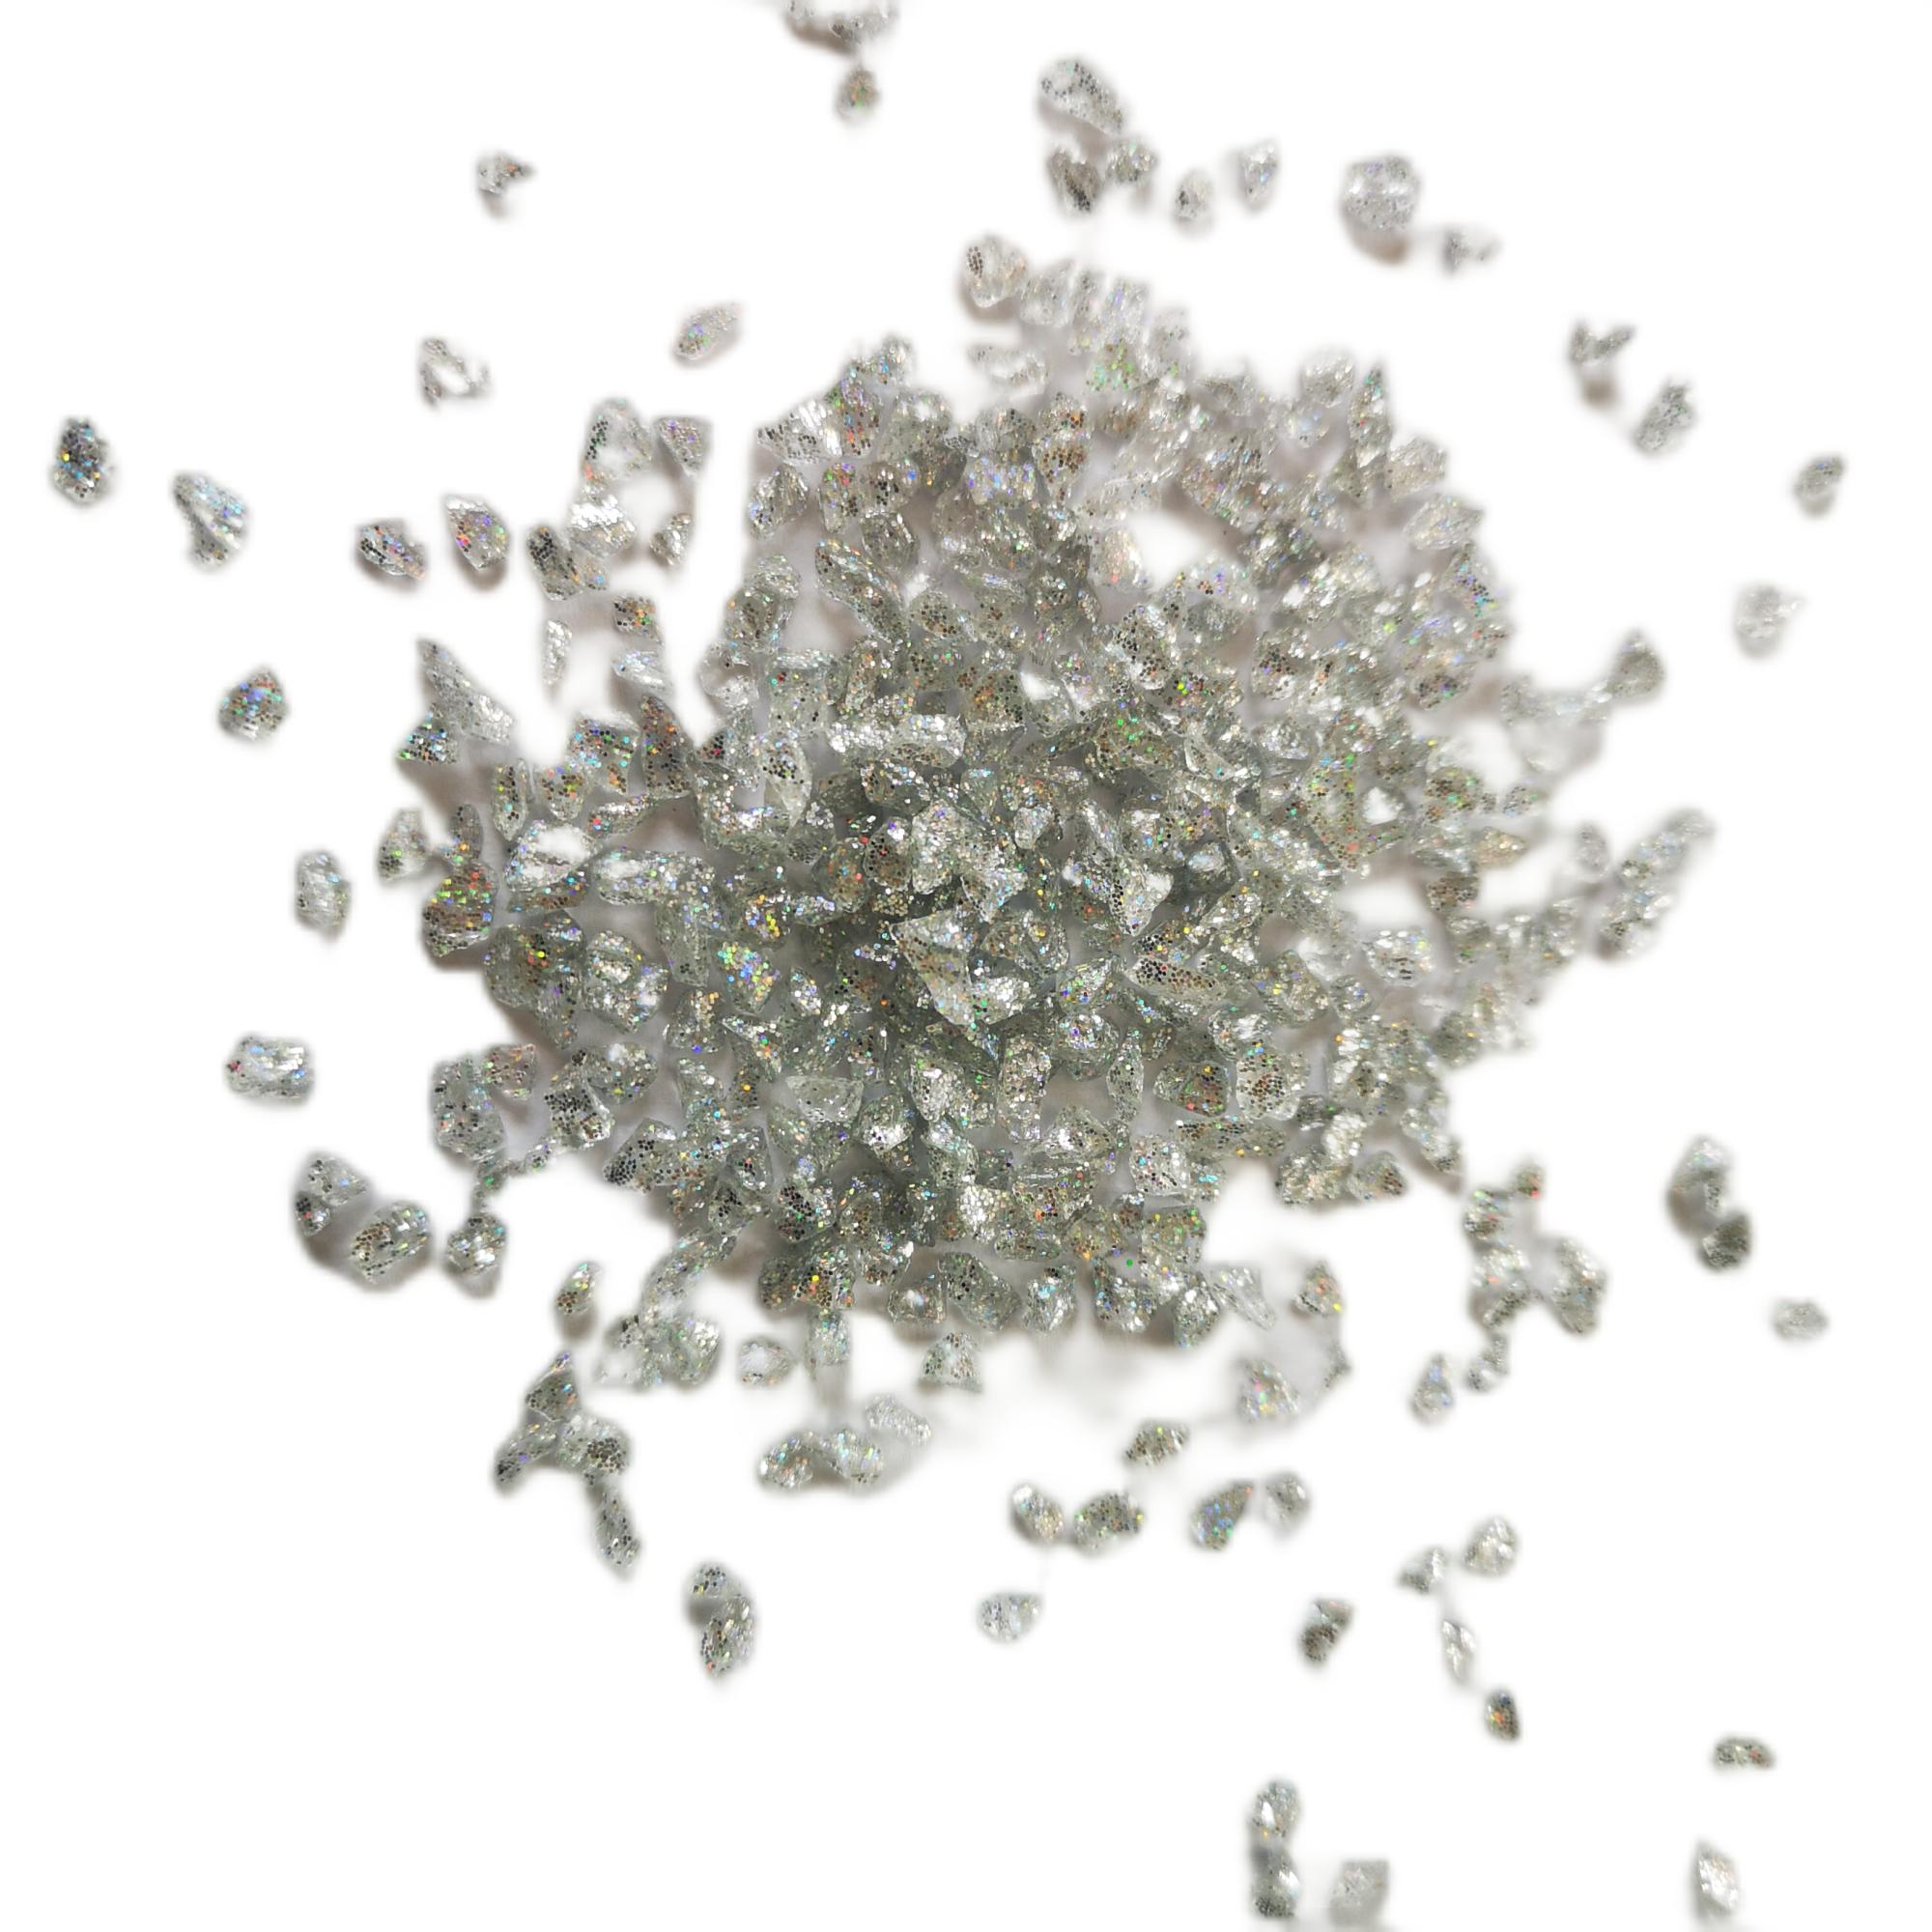 Crushed Glitter Glass Scrap in Engineered Stone Decoration